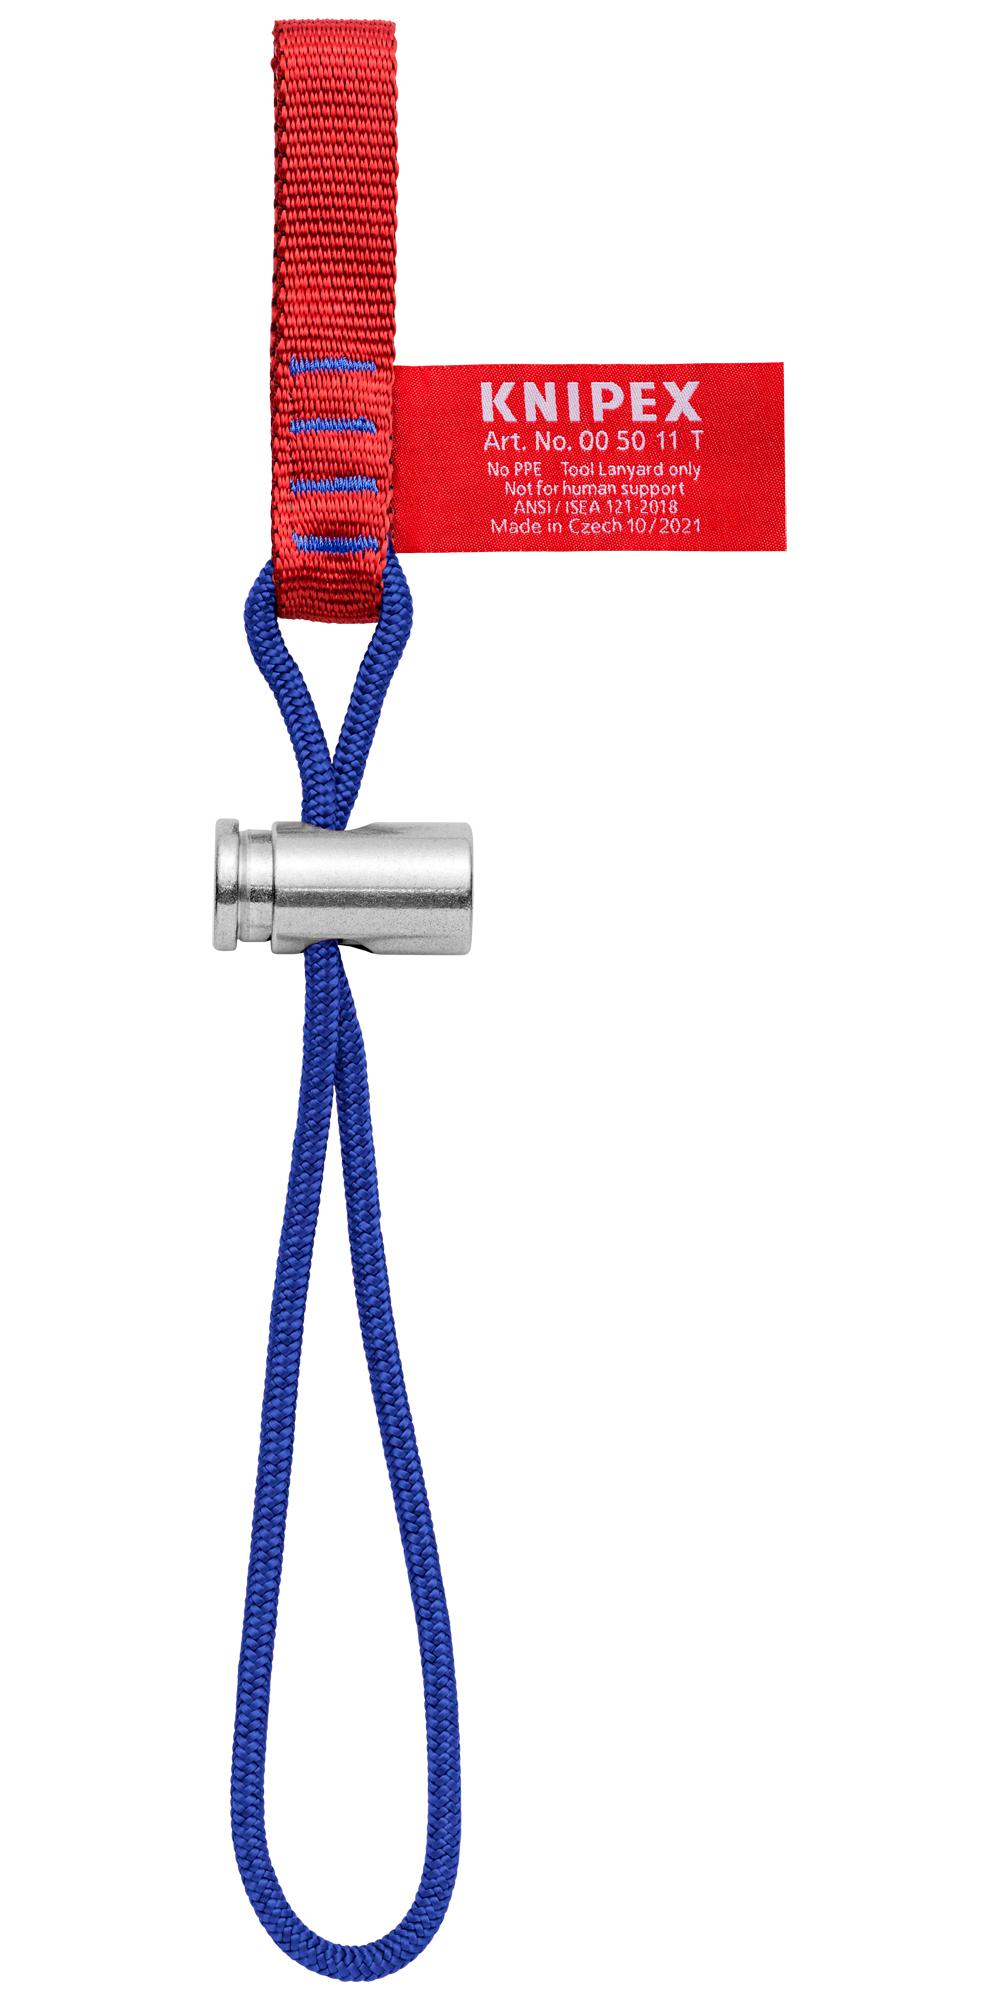 Knipex 00 50 11 T Bk Adapter Strap, Tethered Tool, 85X27mm